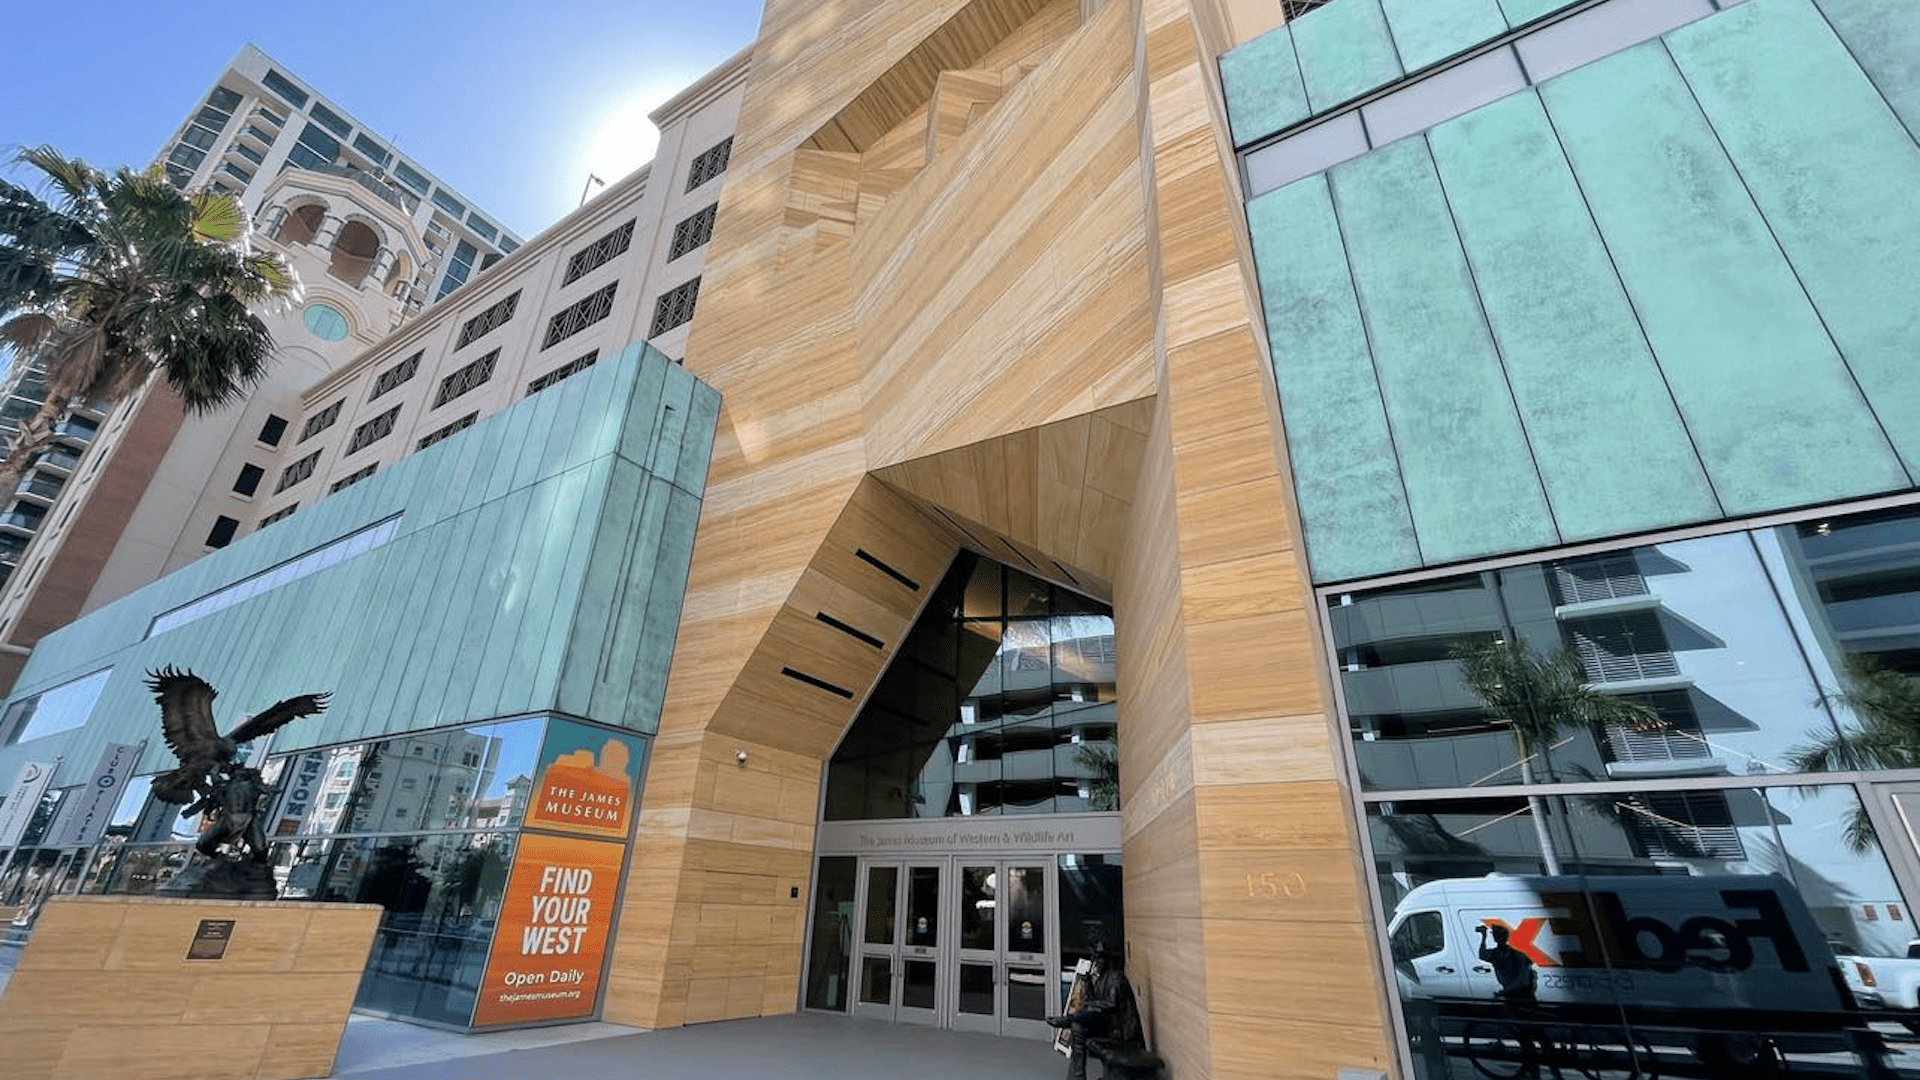 Exterior of a museum with large sculptures out front, a large wooden geometric entrance.